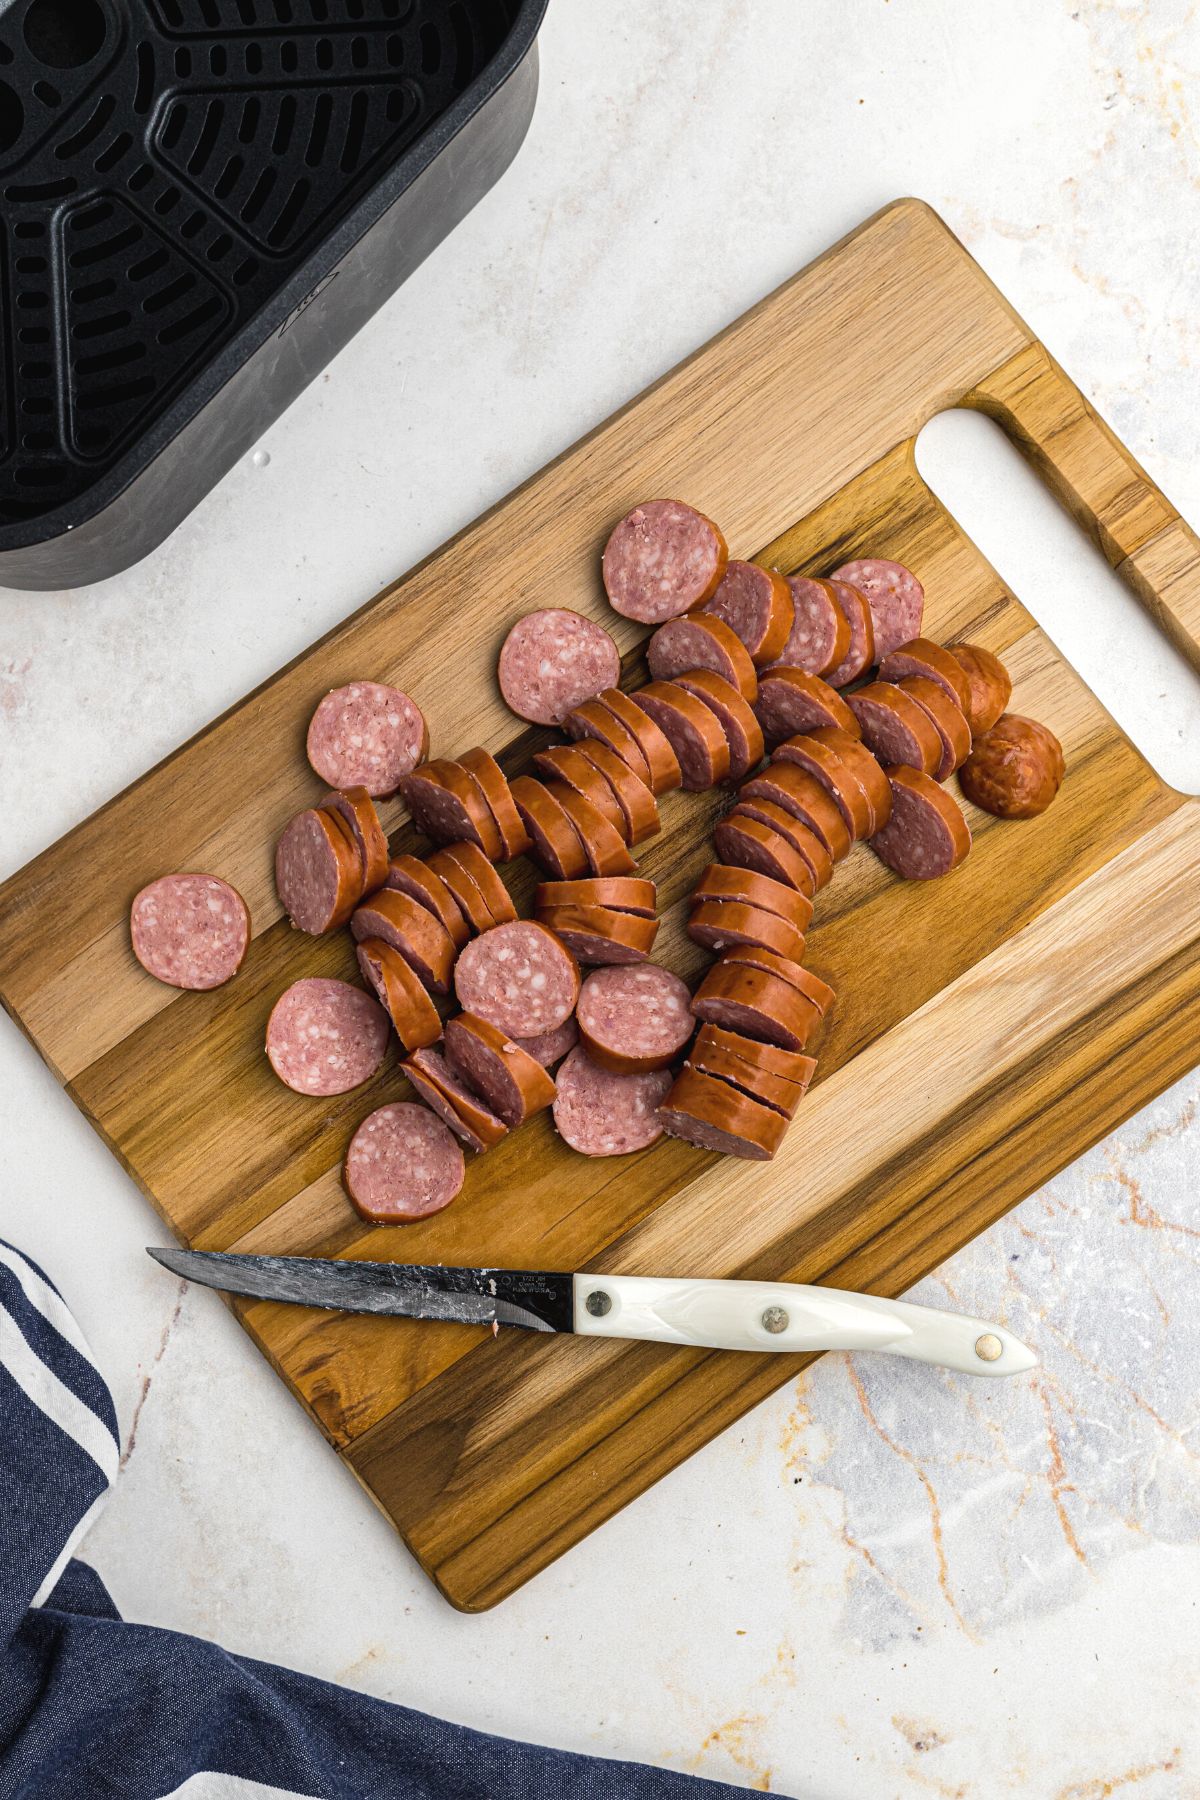 Kielbasa sliced on a wooden cutting board in front of the air fryer basket.